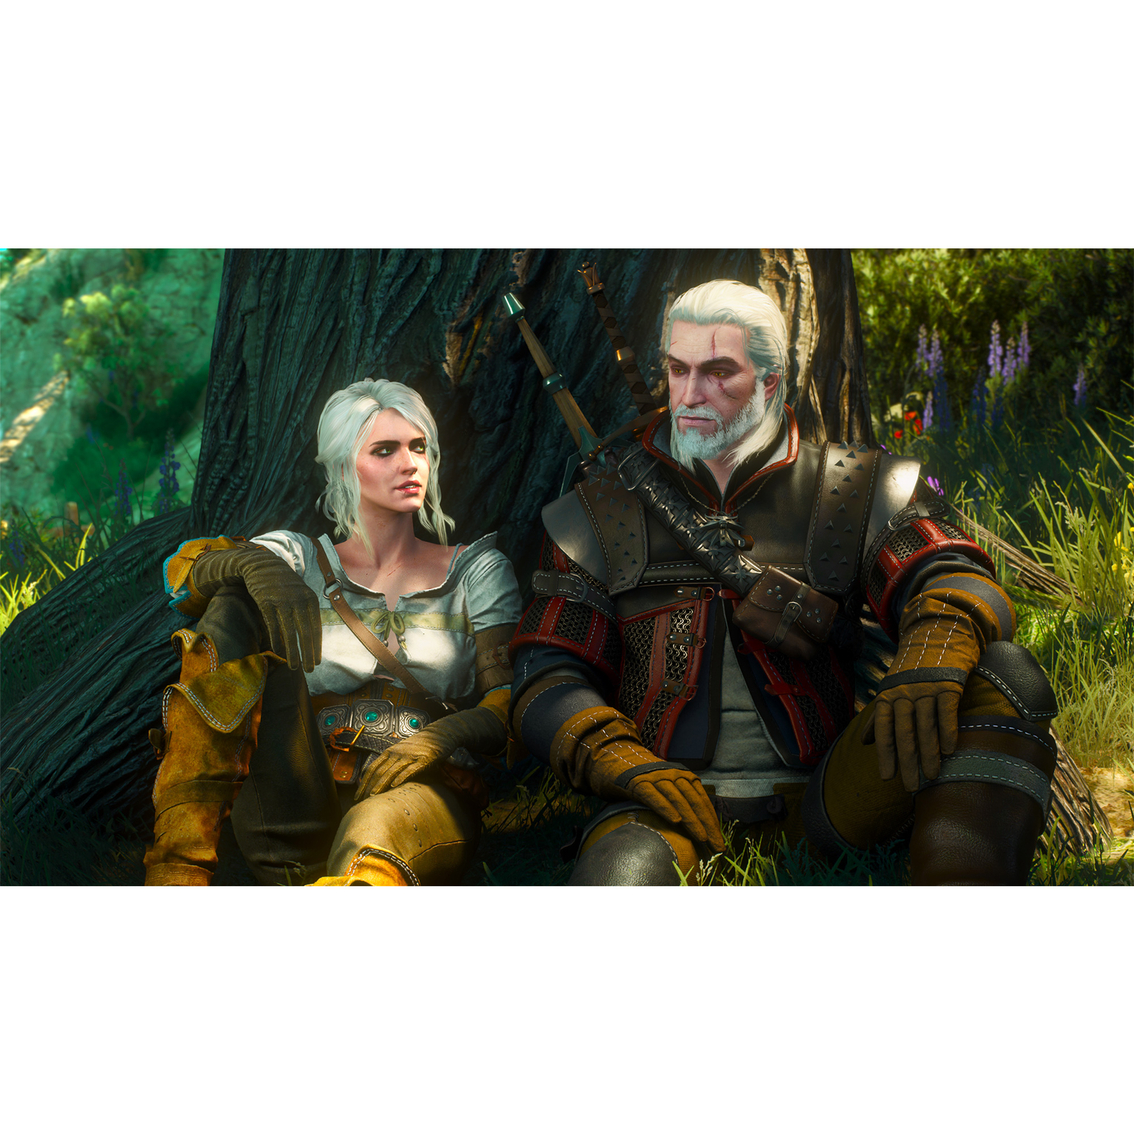 The Witcher 3: Wild Hunt Complete Edition (Xbox SX) - Image 6 of 9